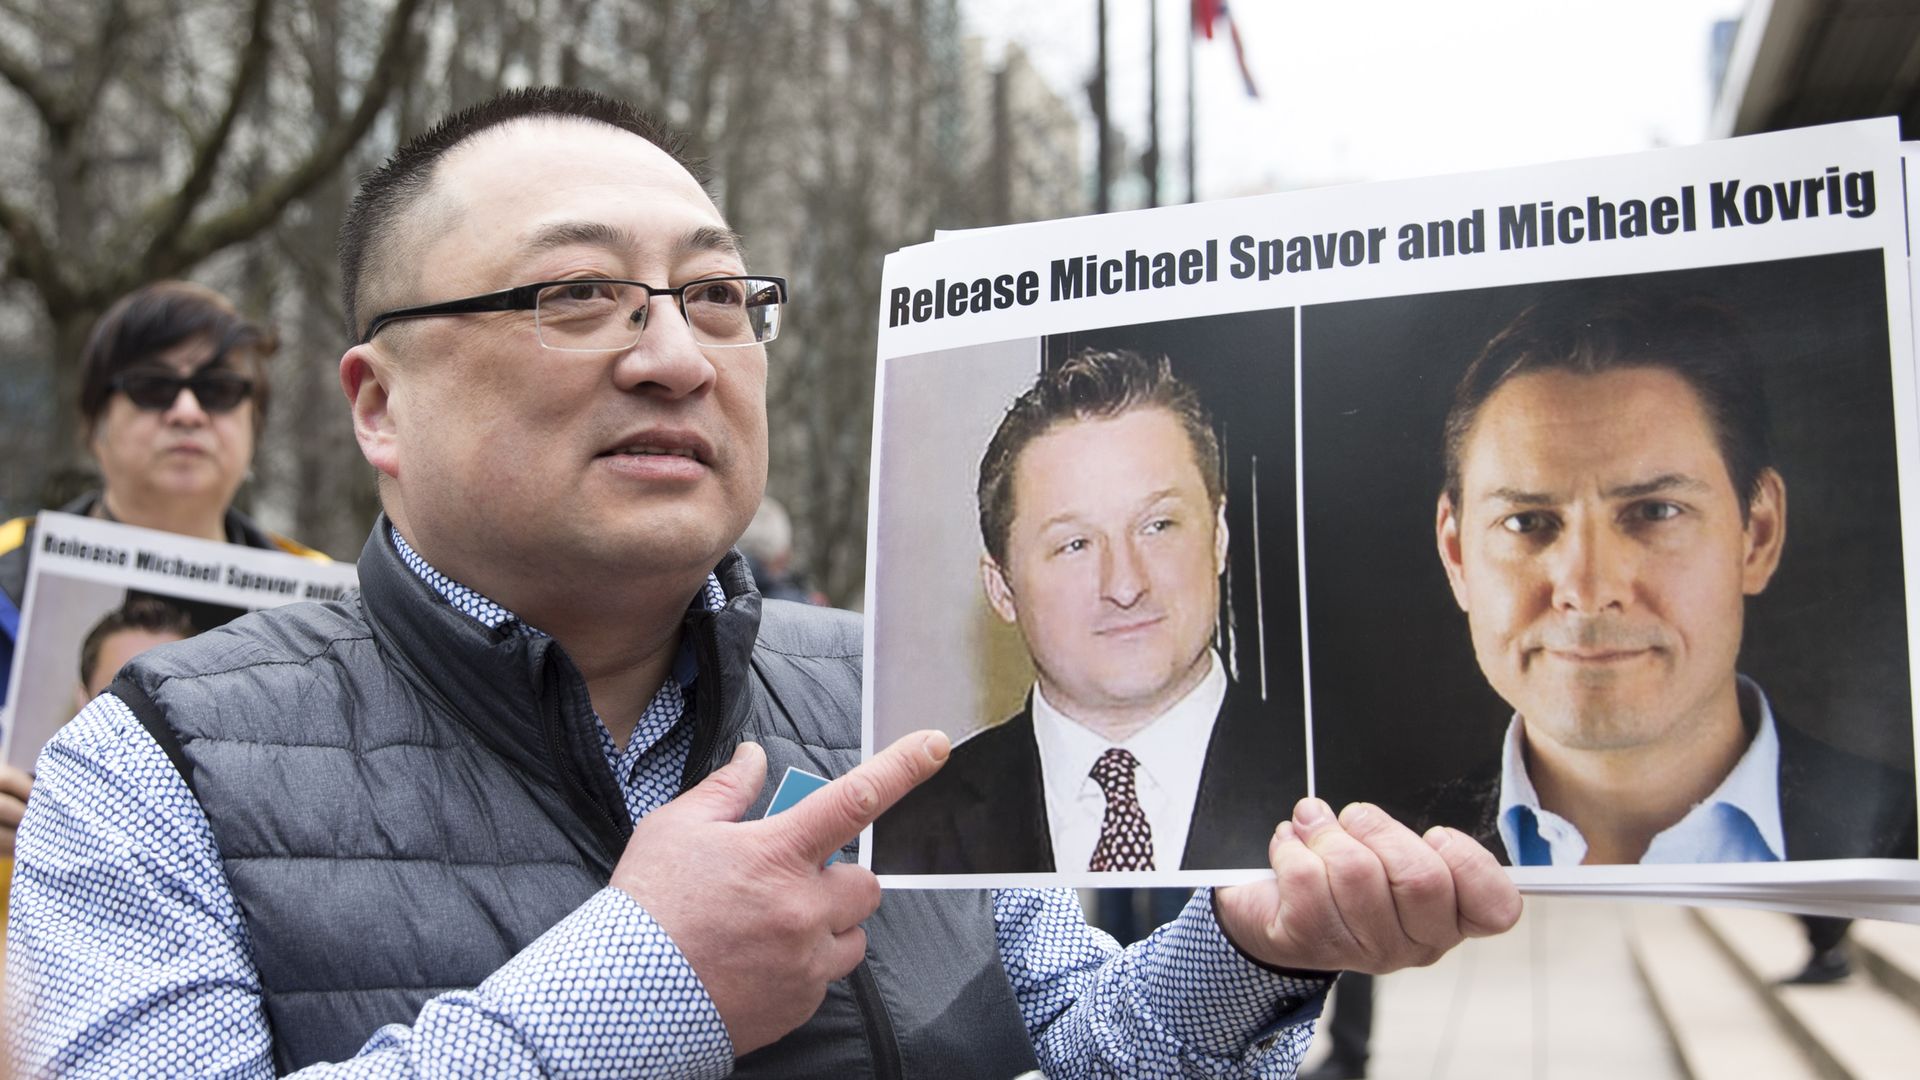 A protester in 2019 holds photos of Canadians Michael Spavor and Michael Kovrig, who are being detained by China, outside British Columbia Supreme Court, in Vancouver